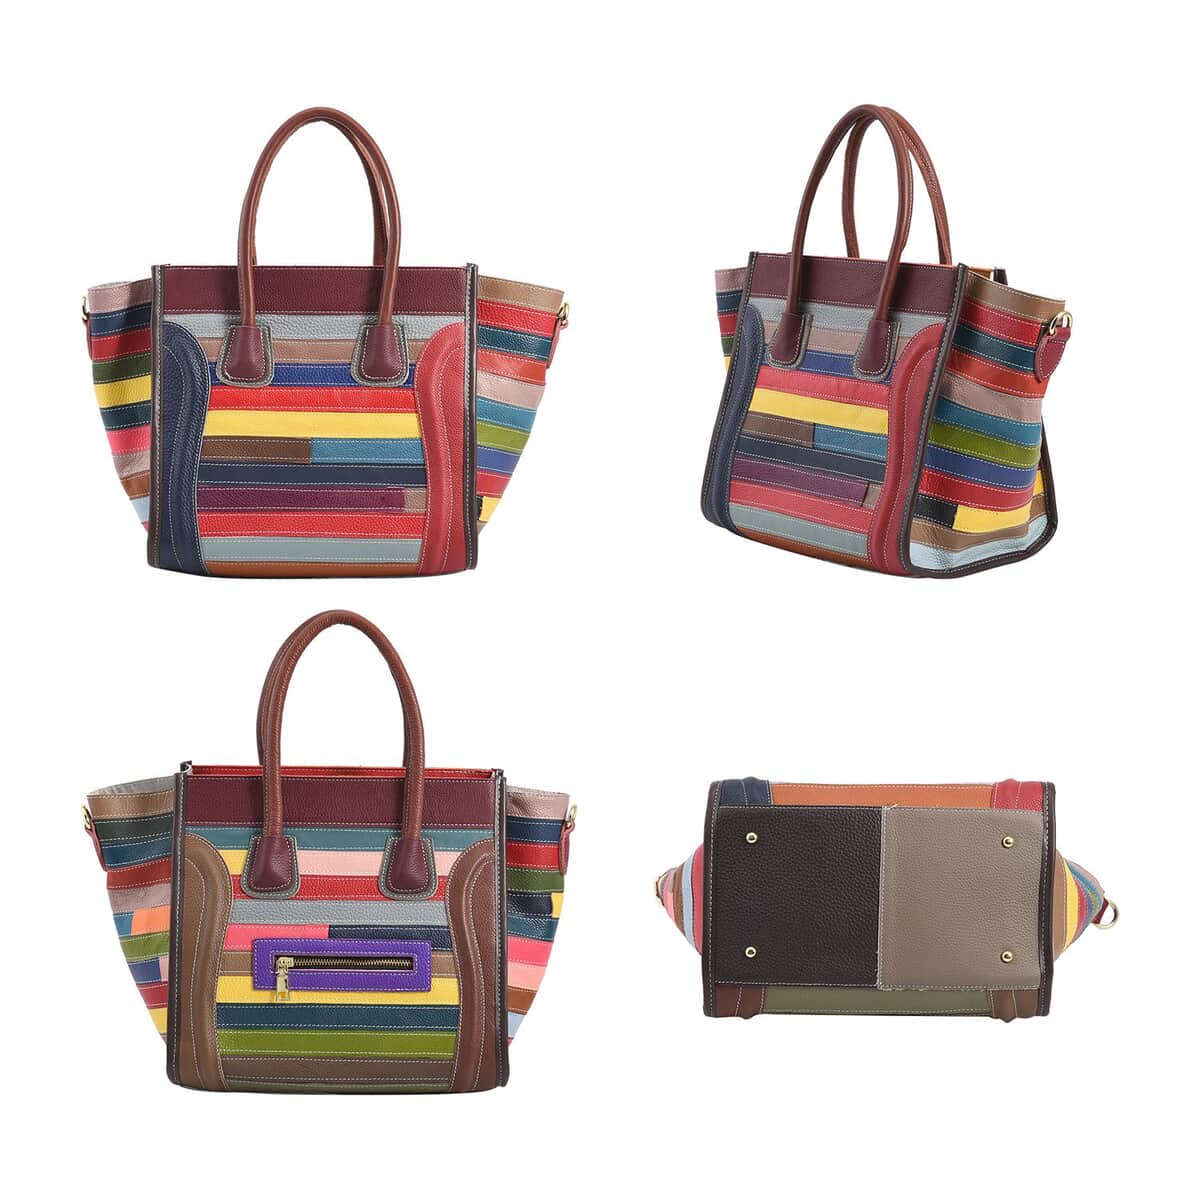 CHAOS Rainbow Color Patchwork Genuine Leather Convertible Tote Bag (19.69"x7.87"x11.02") with Long Shoulder Strap image number 3